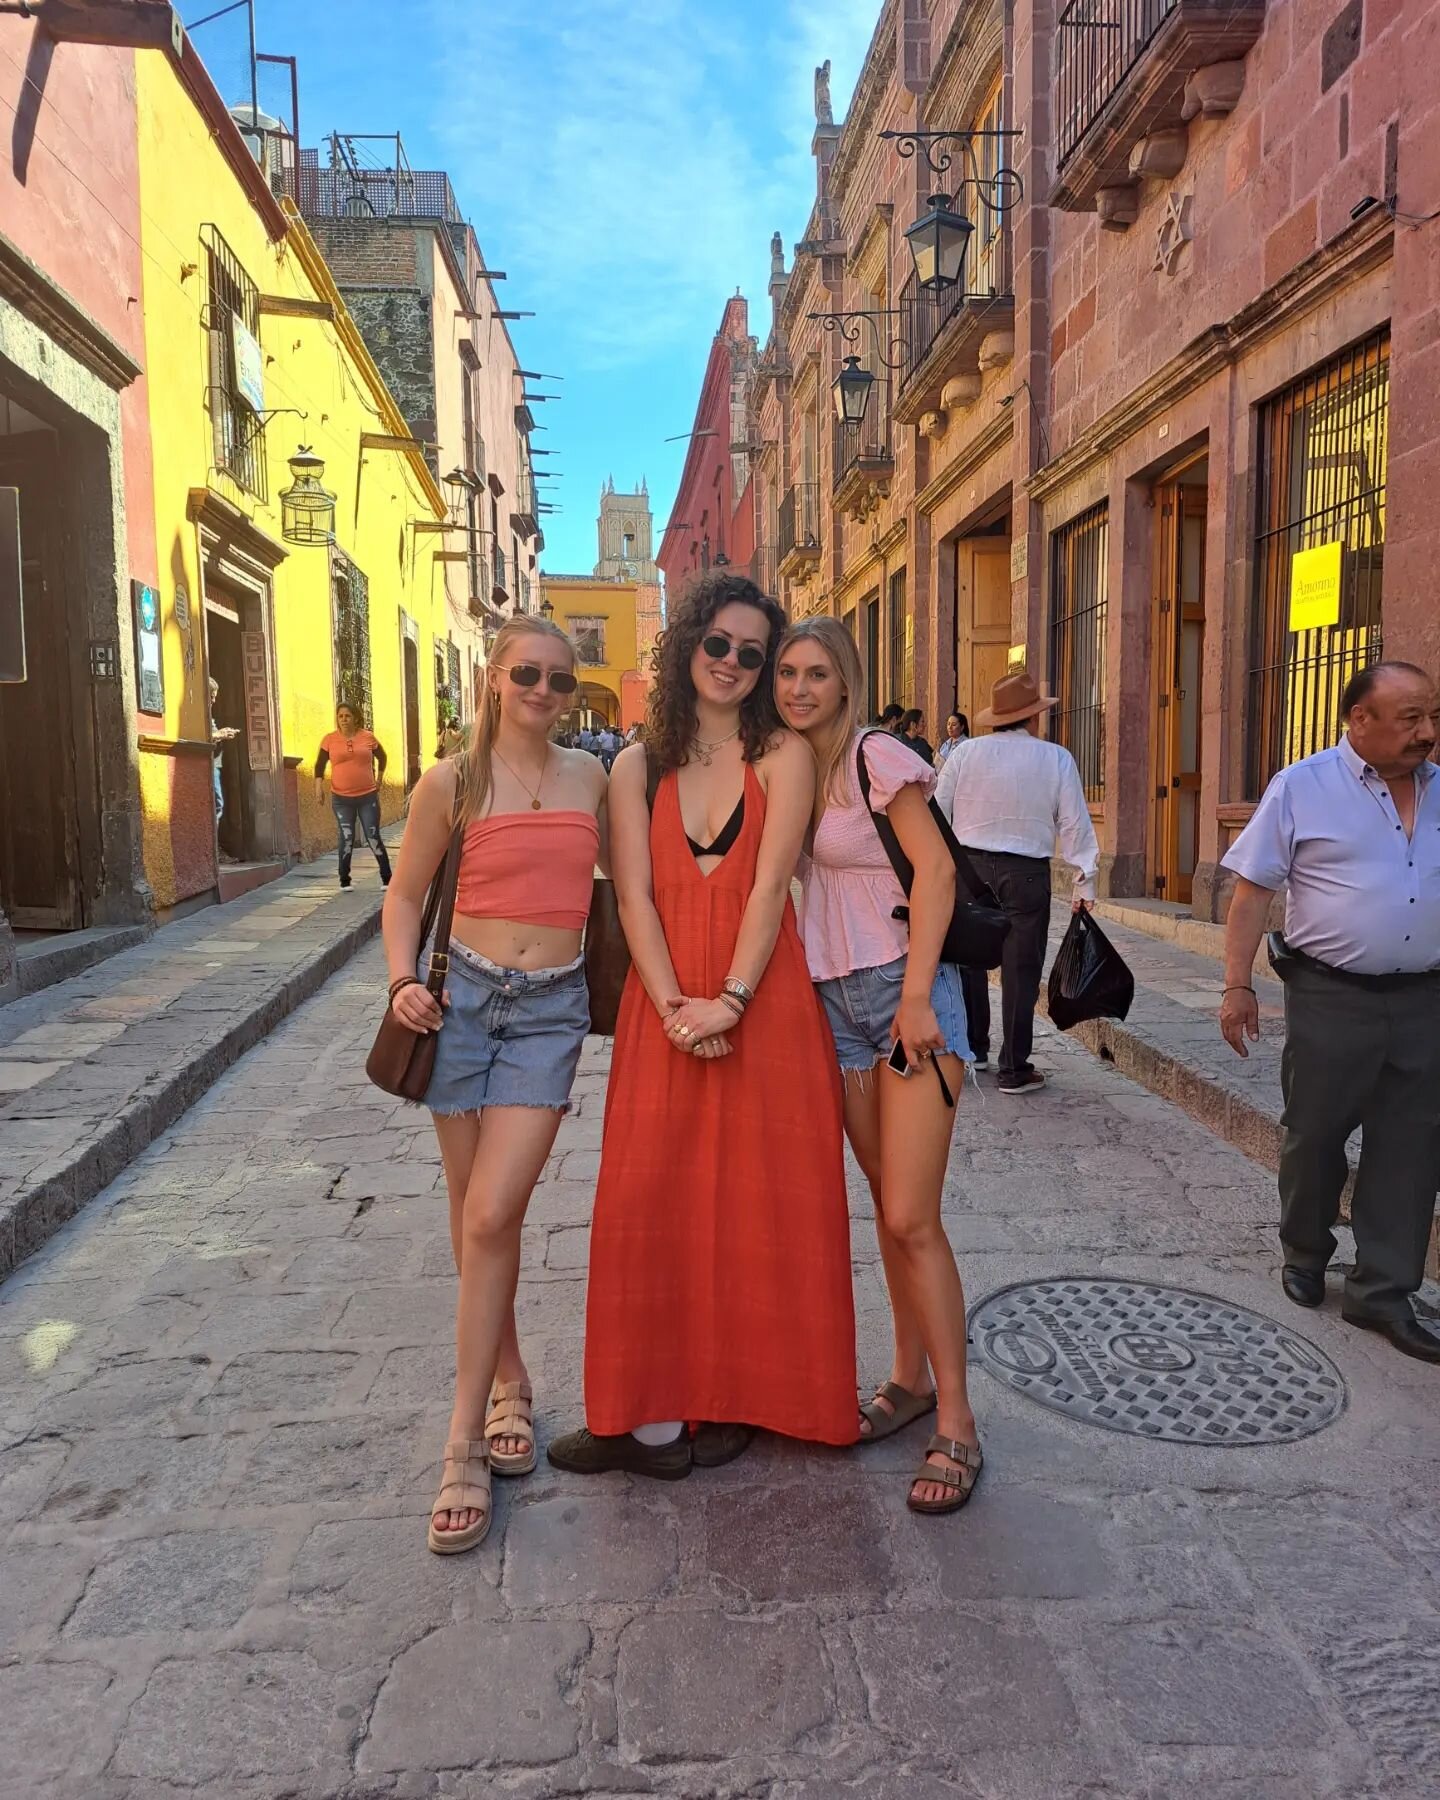 This past week I had the pleasure of hosting 3 wonderful young women in #sanmigueldeallende-my daughter, @maya.niblett and 2 of her friends from #UNM.

They toured the city center, explored local markets, food, and art, went on a wine tasting at a ne